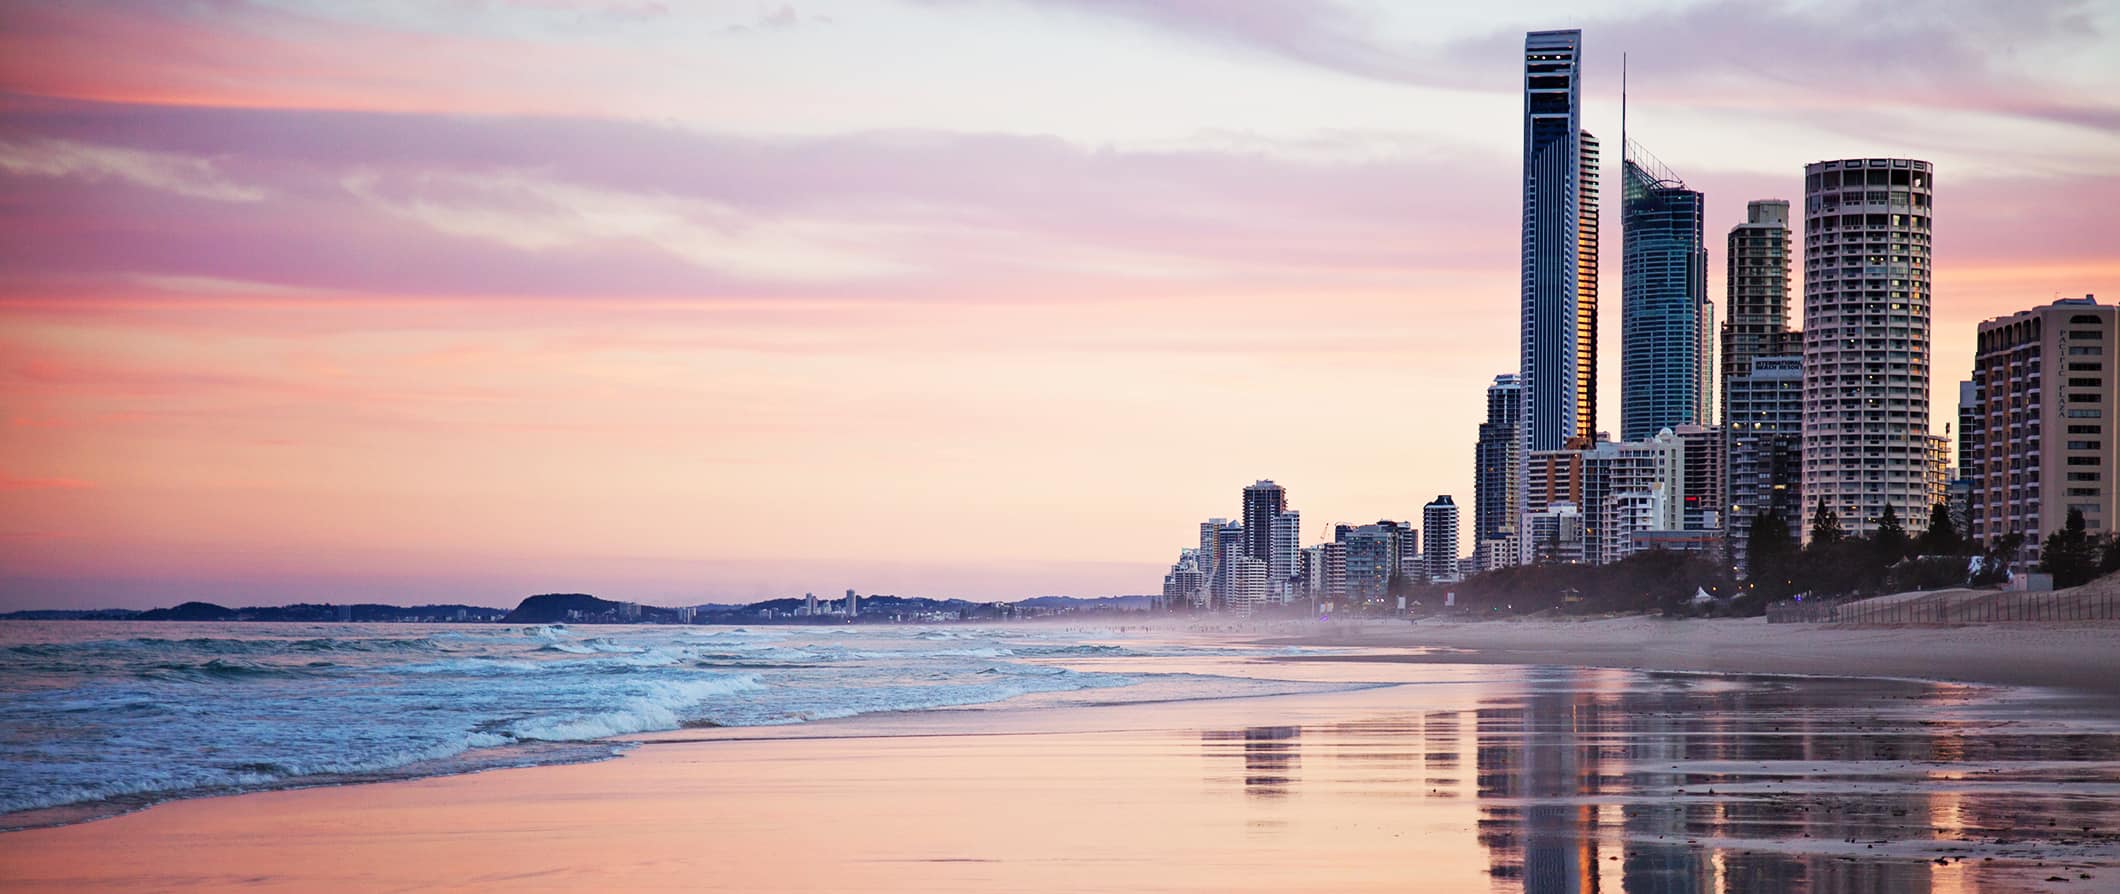 Towering buildings along the Gold Coast in Australia at sunrise